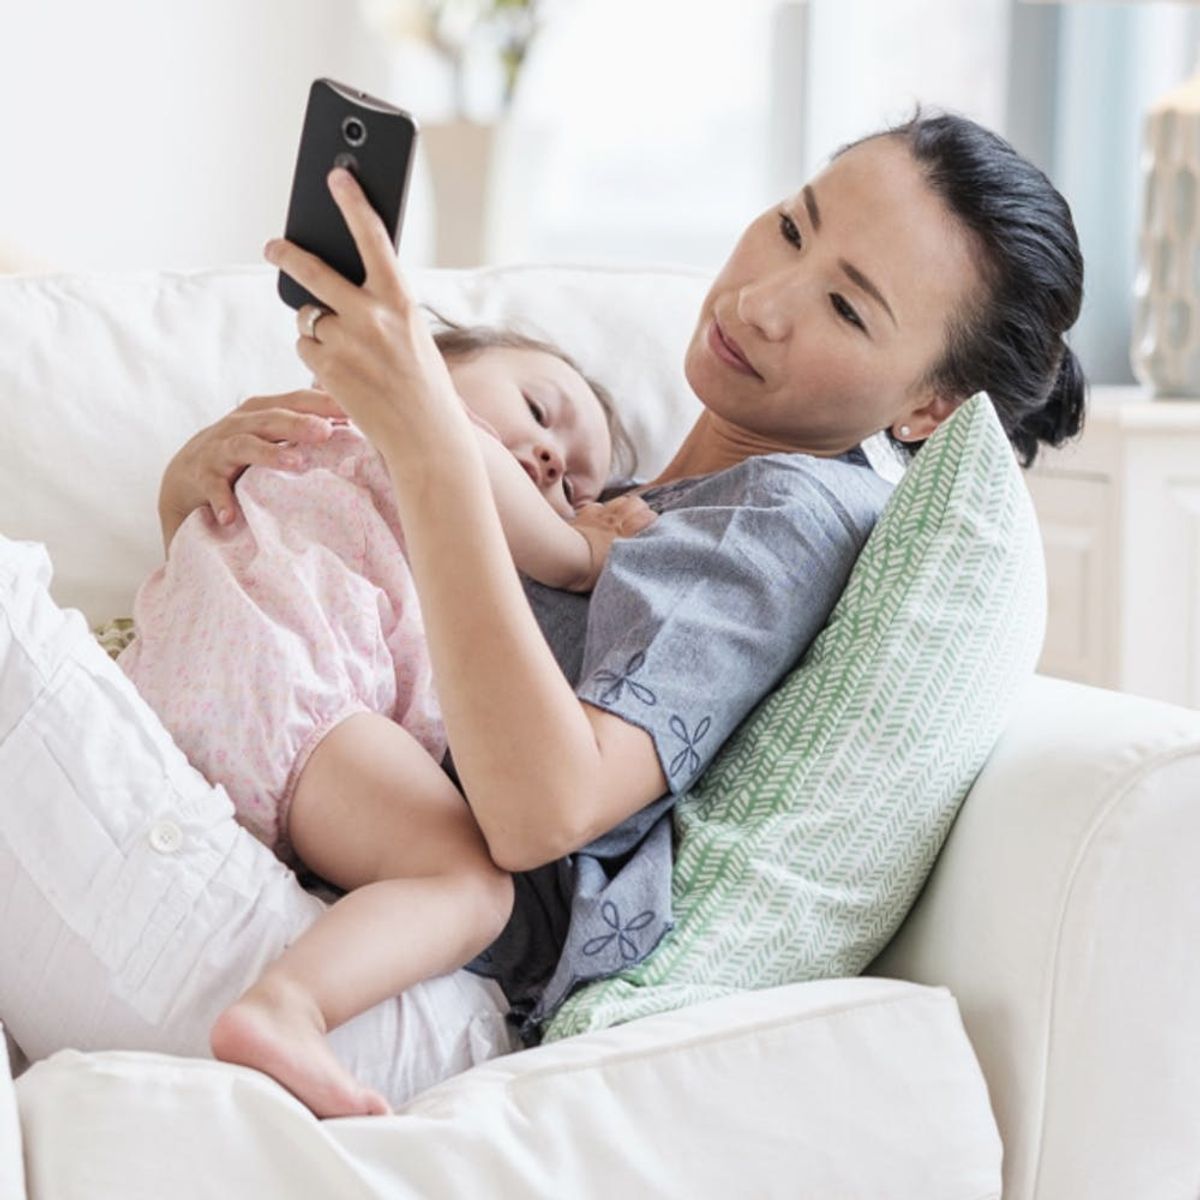 The Top 8 Apps Every New Parent Needs